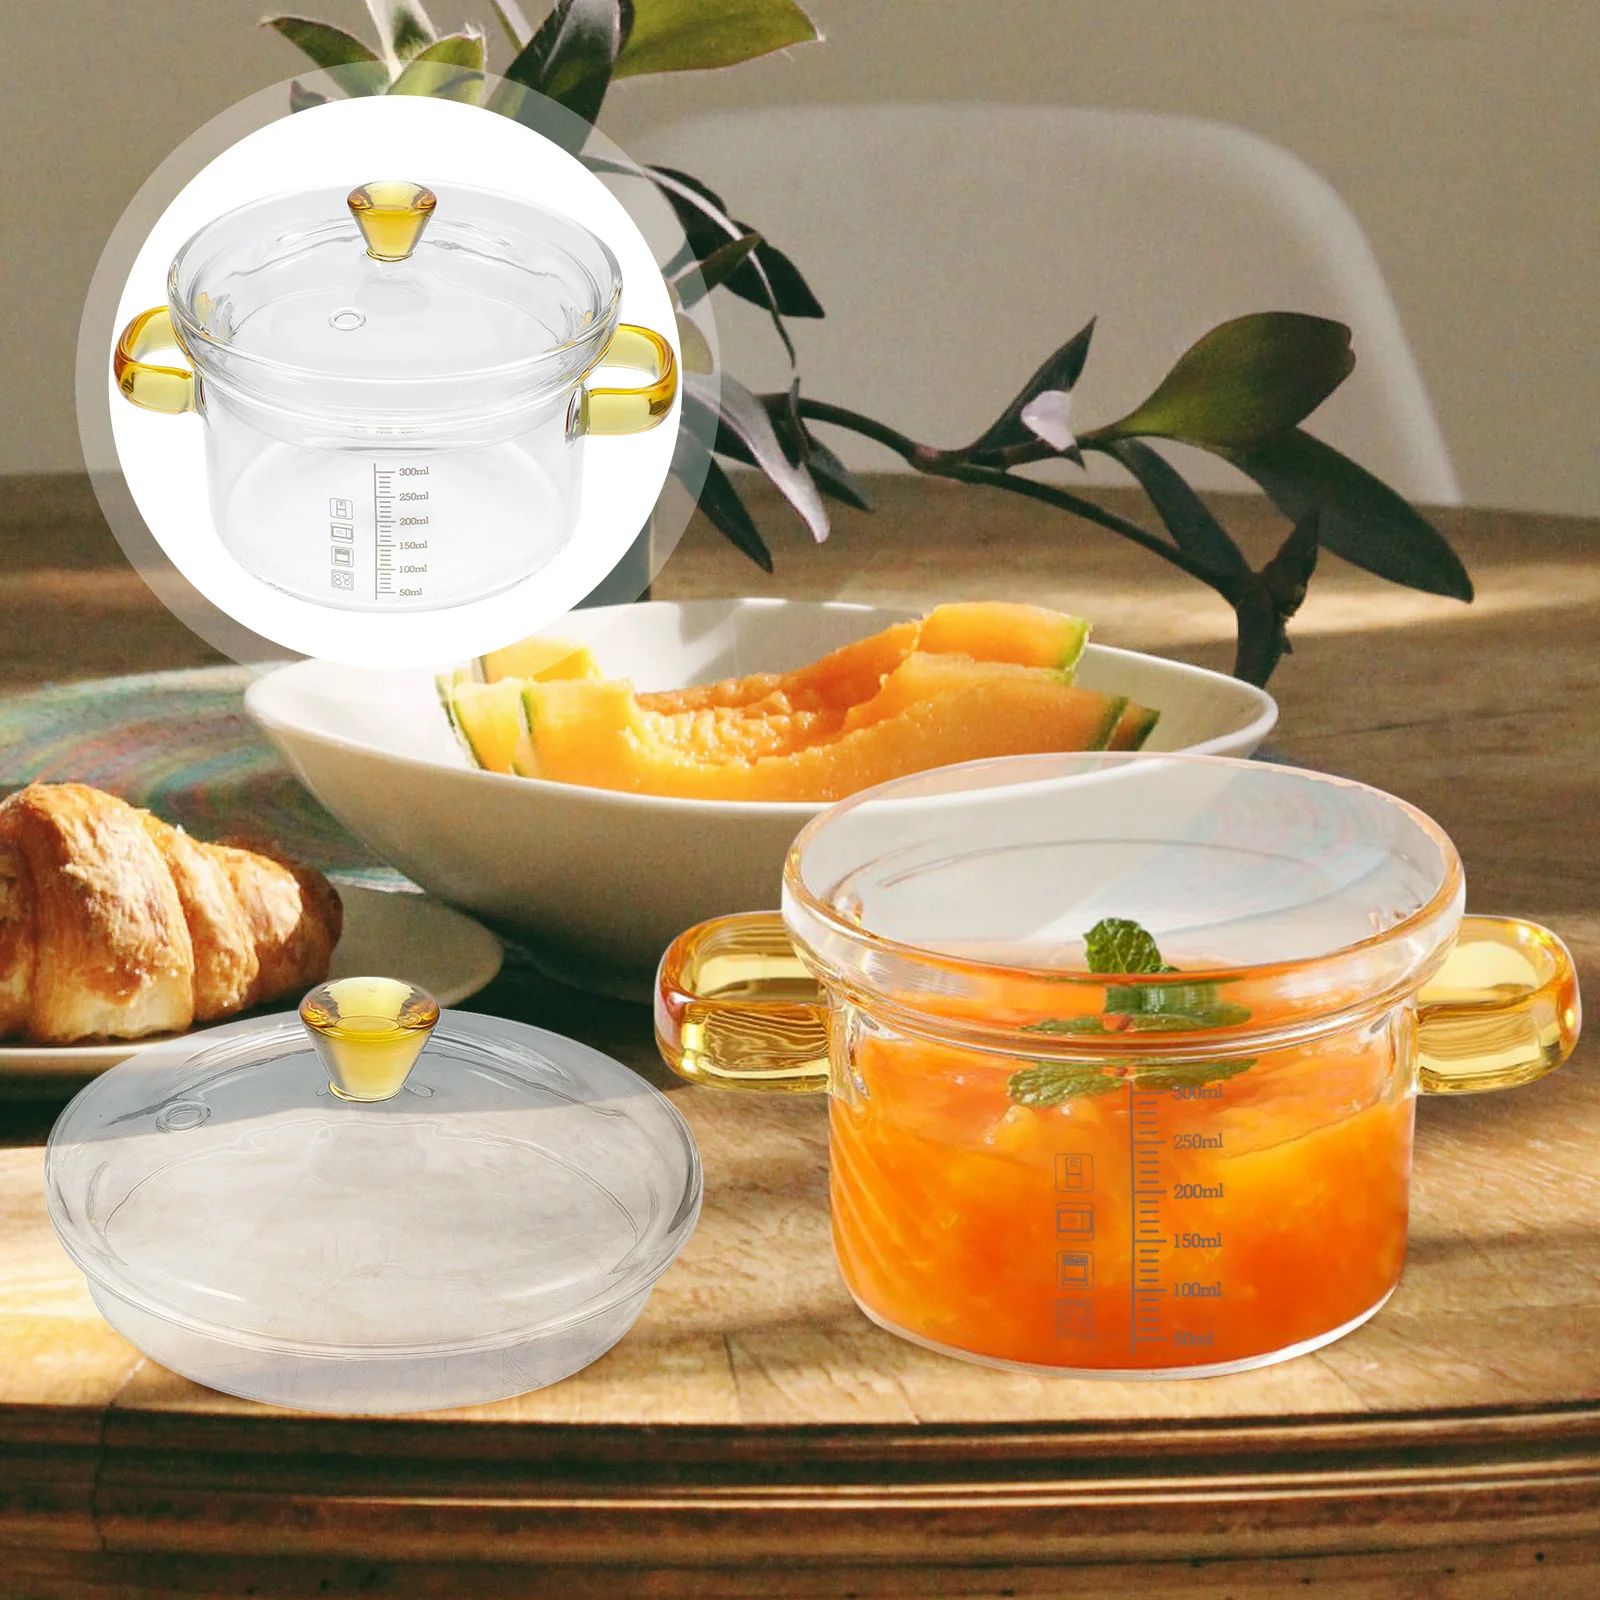 

Glass Bird's Nest Stew Pot Soup Bowls Cooking with Lid Multifunctional Salad Lids Container Steamed Egg Home